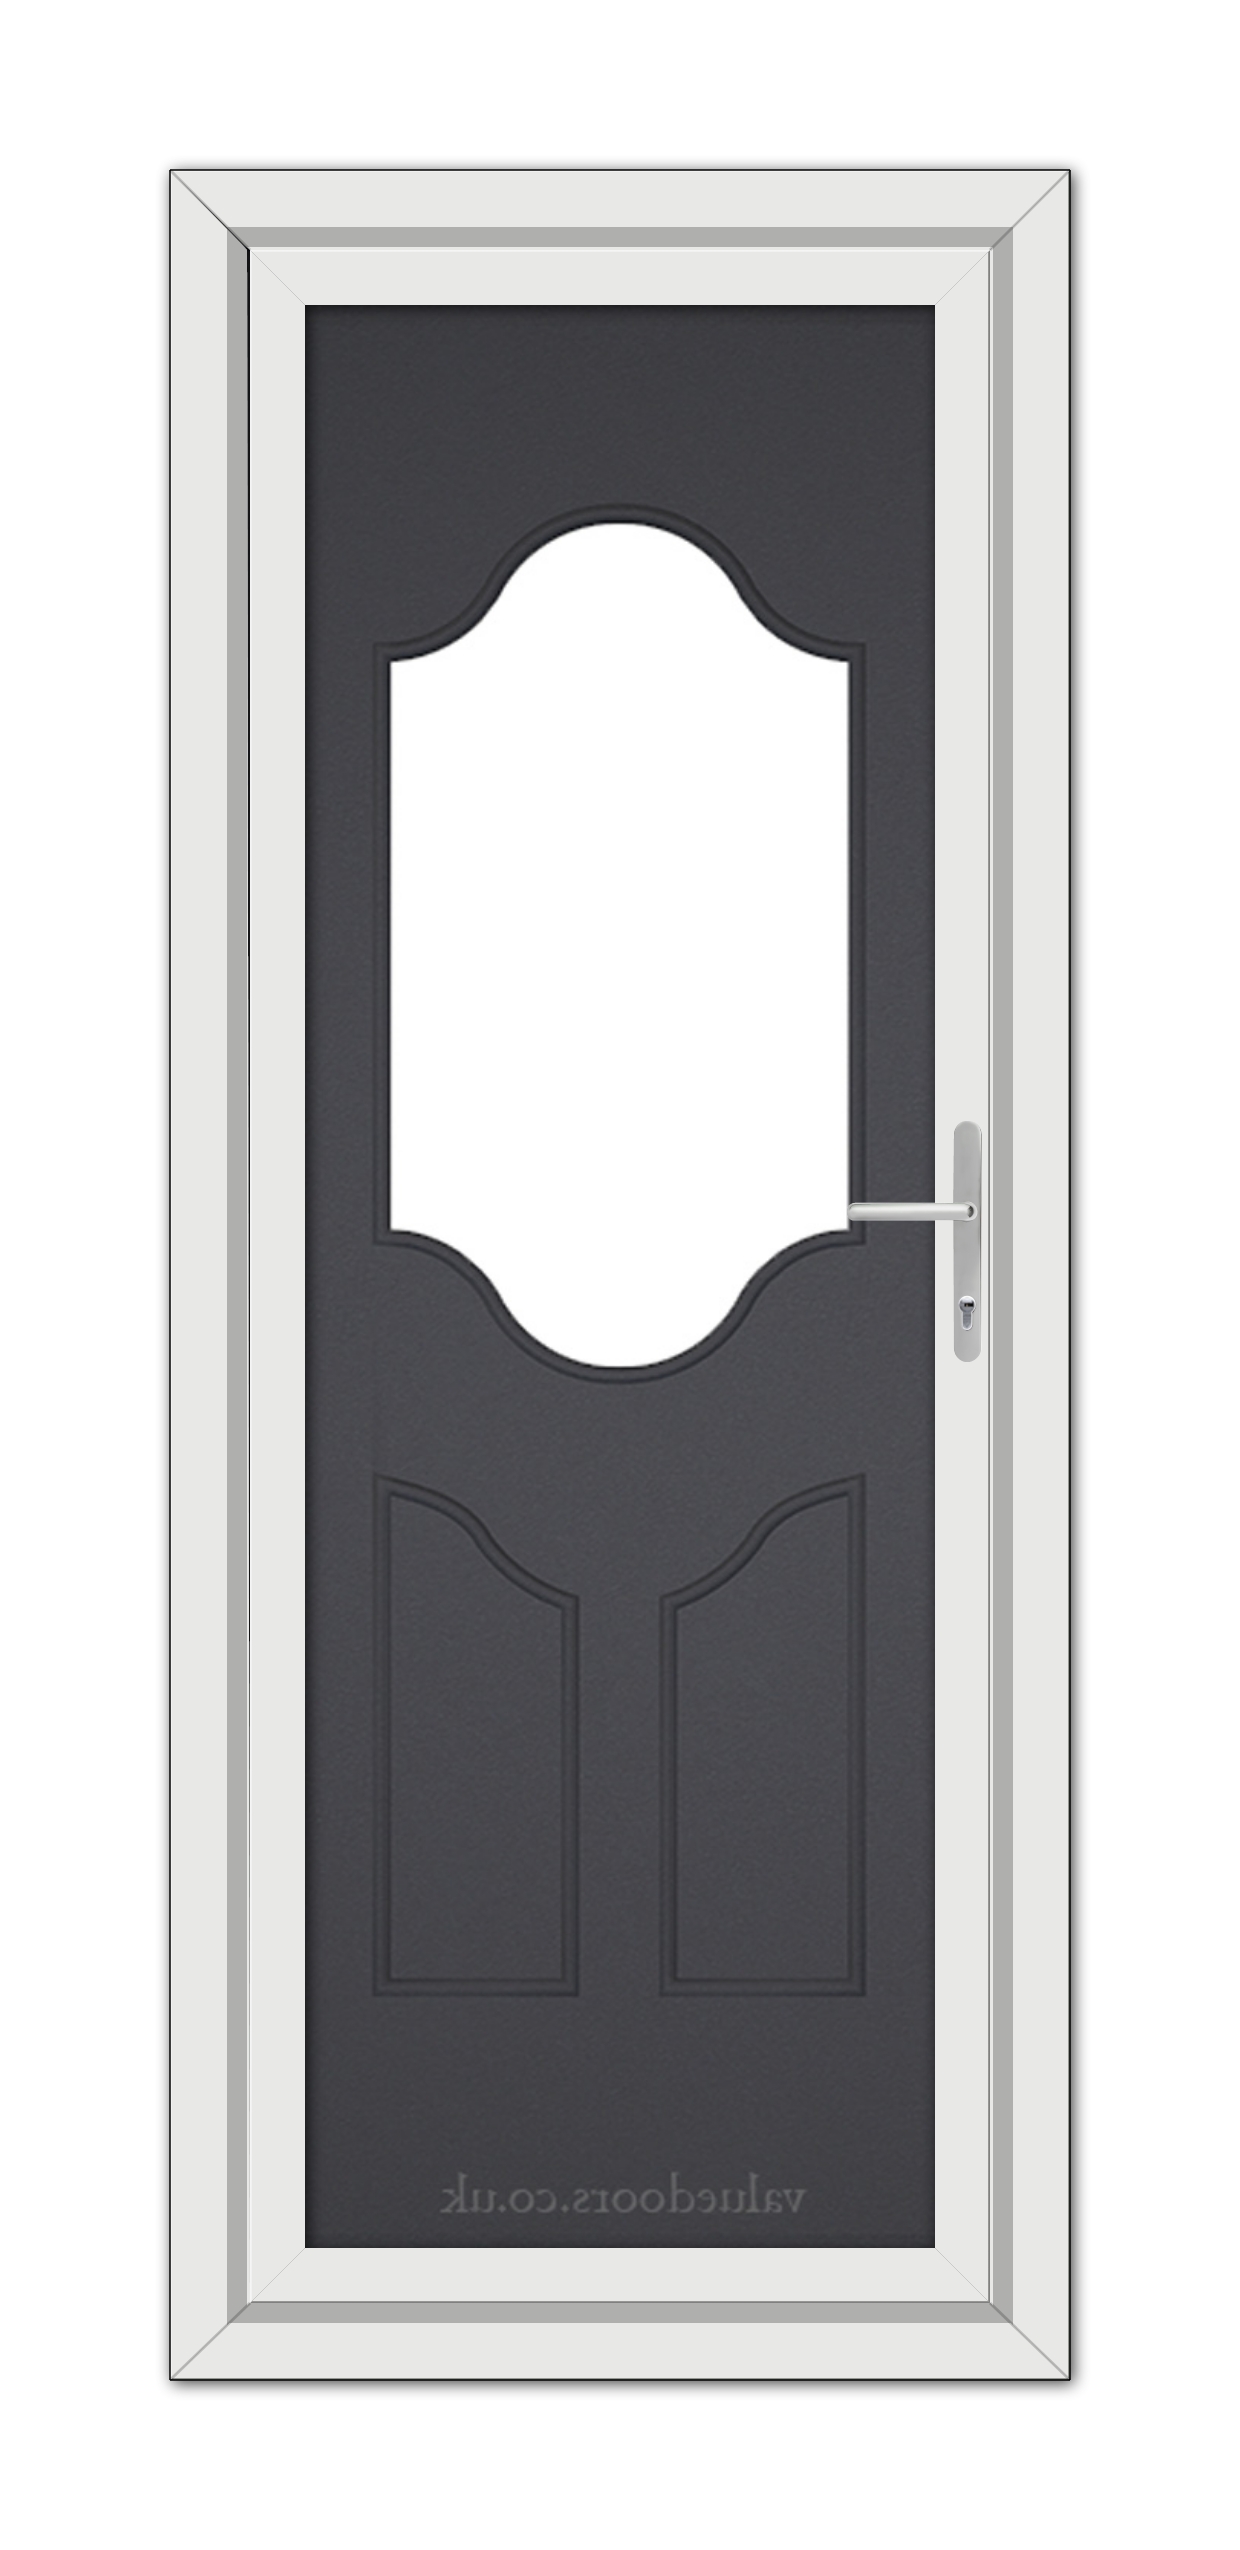 A vertical image of a Grey Grained Althorpe One uPVC Door with a large, central oval glass window, framed in white with a silver handle on the right side.